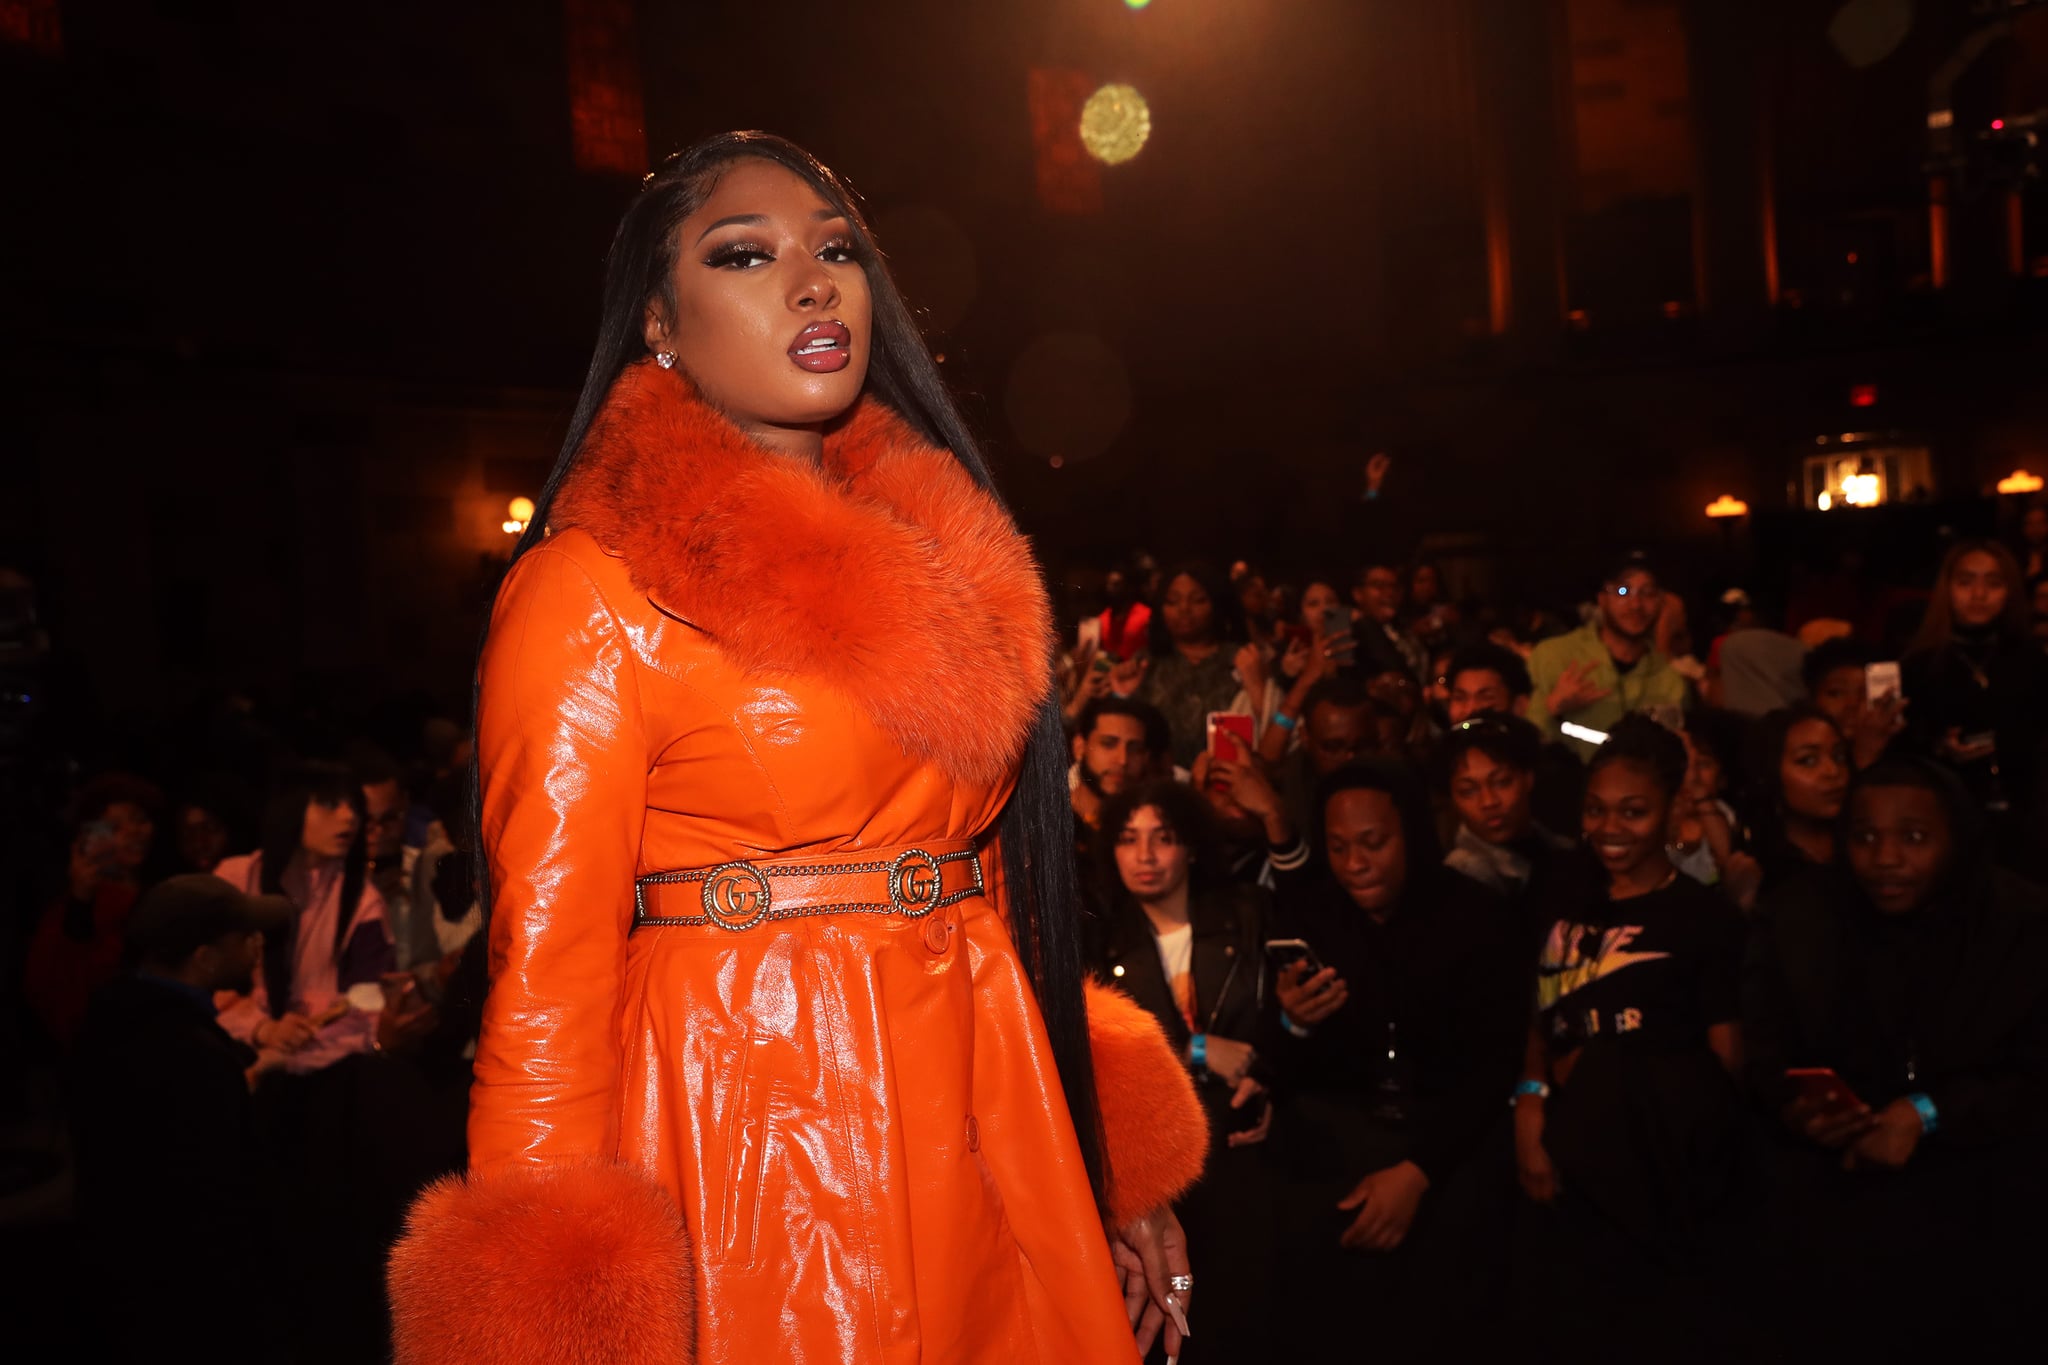 NEW YORK, NEW YORK - MARCH 10: Recording artist Megan Thee Stallion appears onstage at #CRWN  A Conversation With Elliott Wilson And Megan Thee Stallion at Gotham Hall on March 10, 2020 in New York City. (Photo by Johnny Nunez/WireImage)